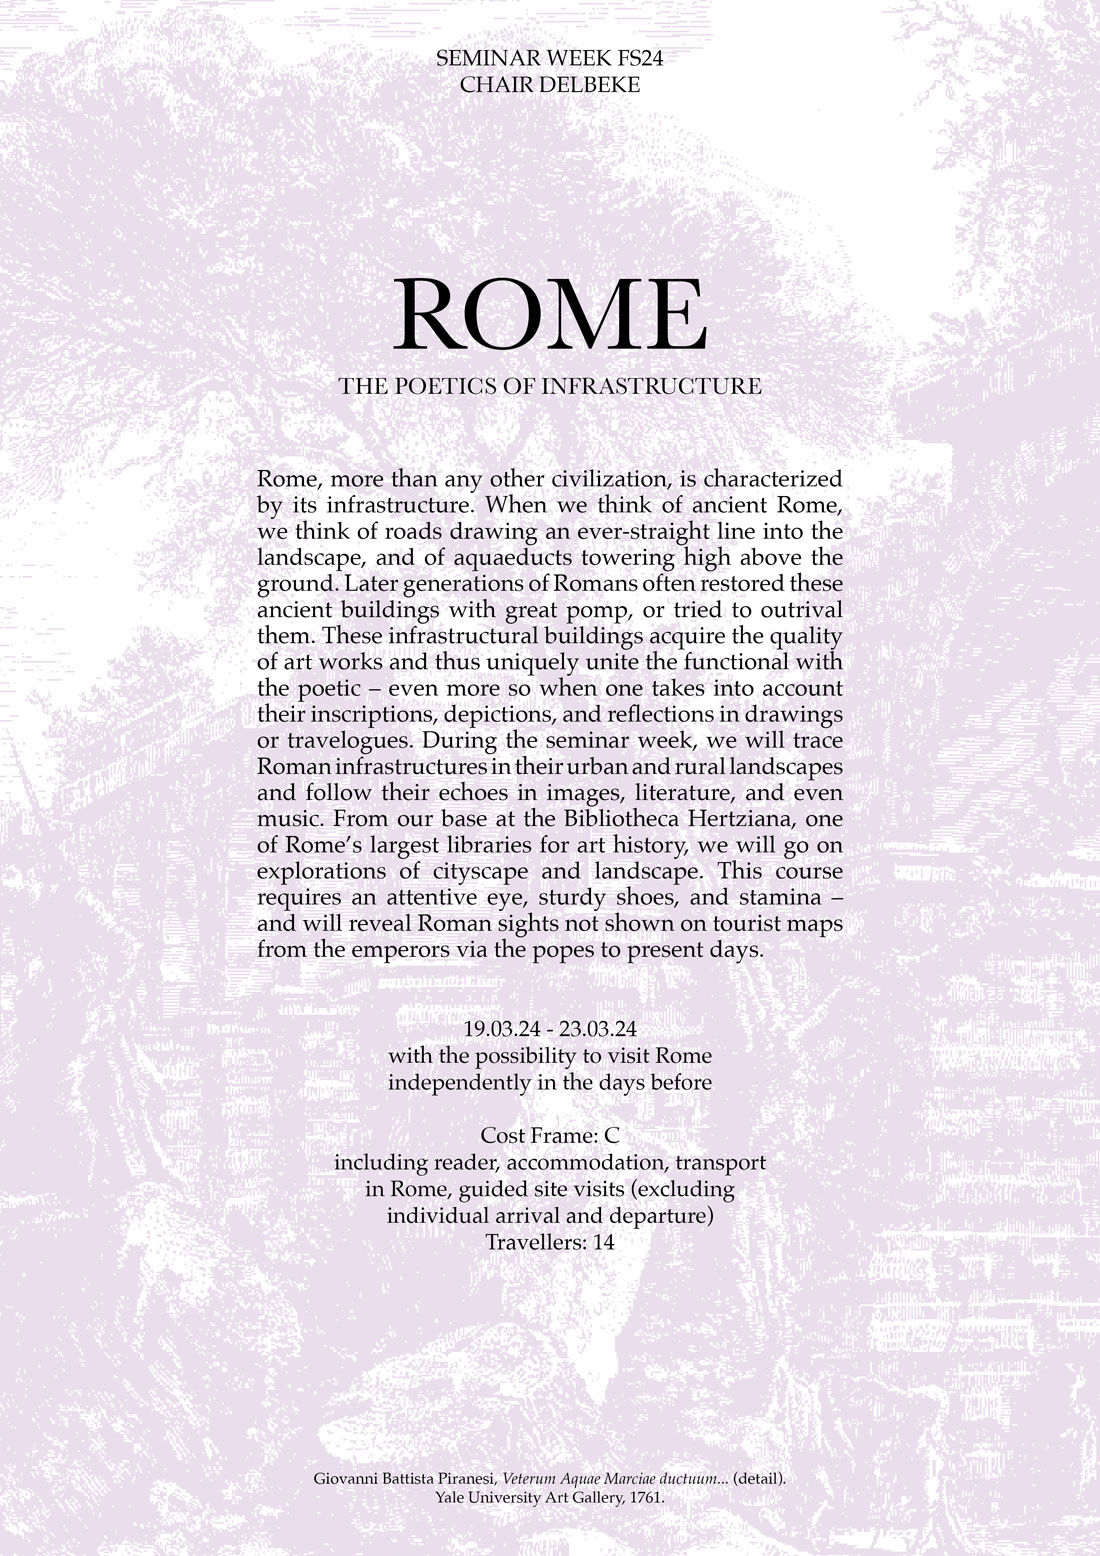 poster advertising the seminar week trip to Rome, Italy with a background image from a print by Giovanni Battista Piranesi